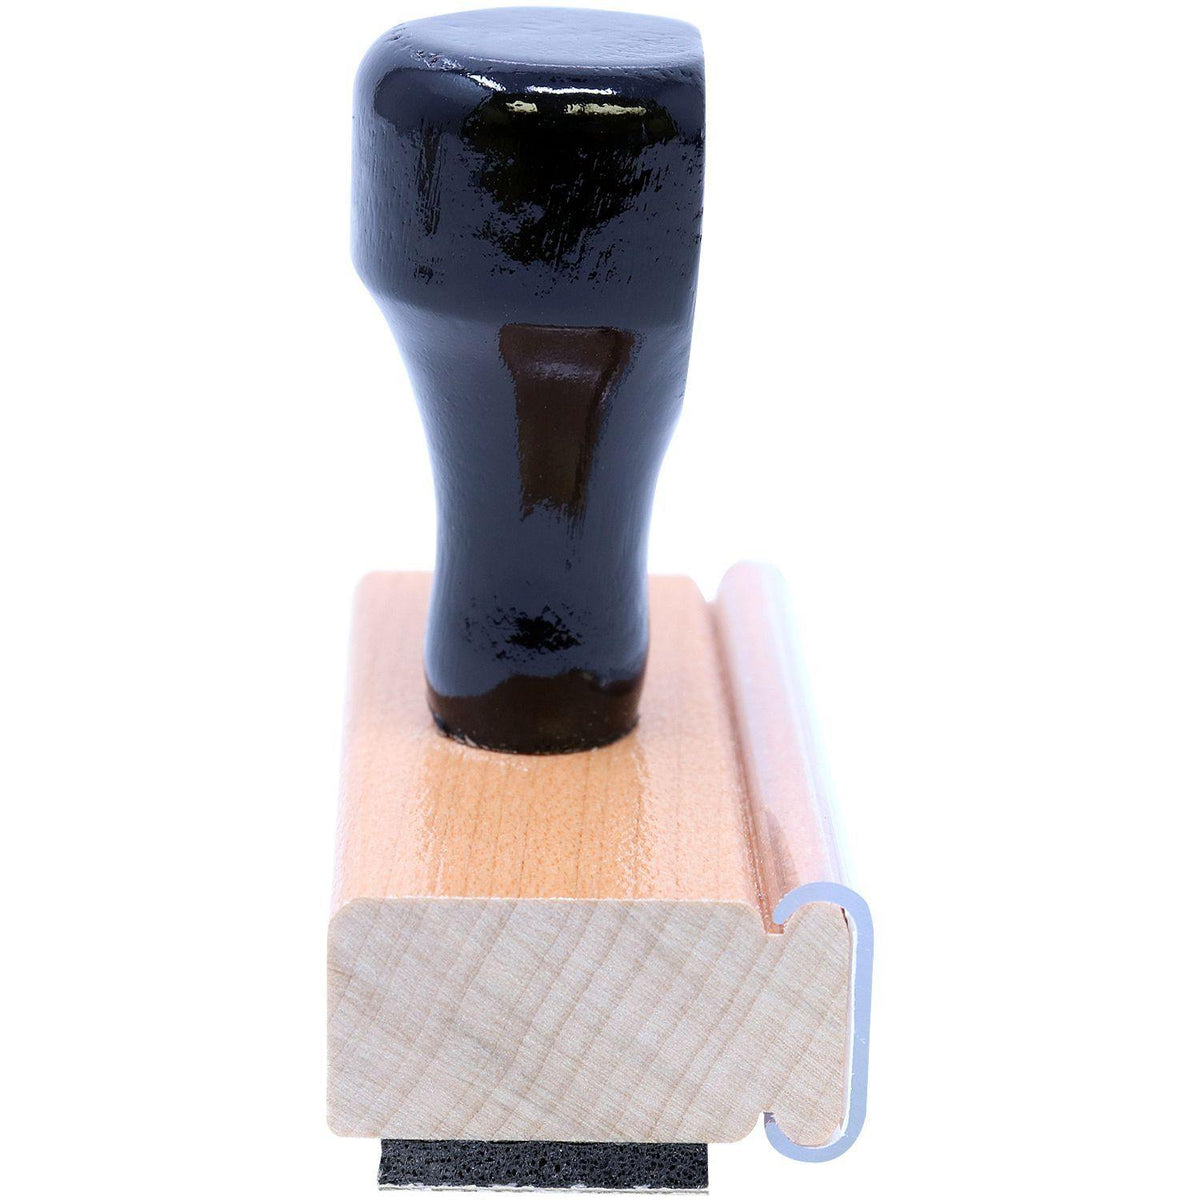 Round Keep up the Good Work Rubber Stamp - Engineer Seal Stamps - Brand_Acorn, Impression Size_Small, Stamp Type_Regular Stamp, Type of Use_General, Type of Use_Teacher